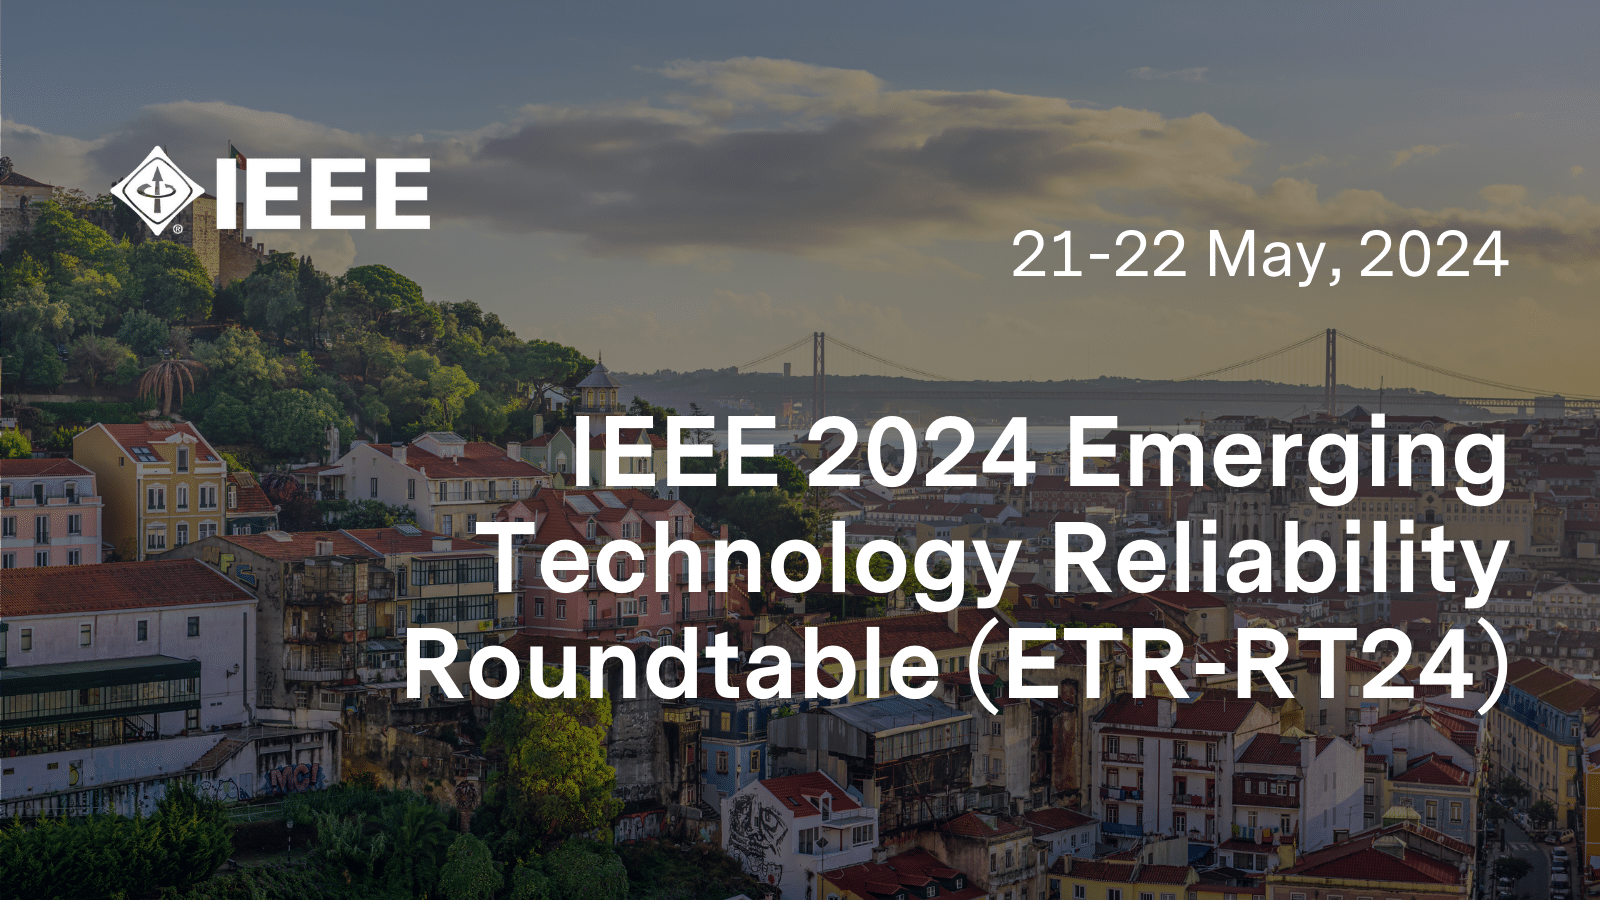 View of Lisbon with IEEE logo and text: IEEE 2024 Emerging Technology Reliability Roundtable (ETR-RT24), 21-22 May, 2024.